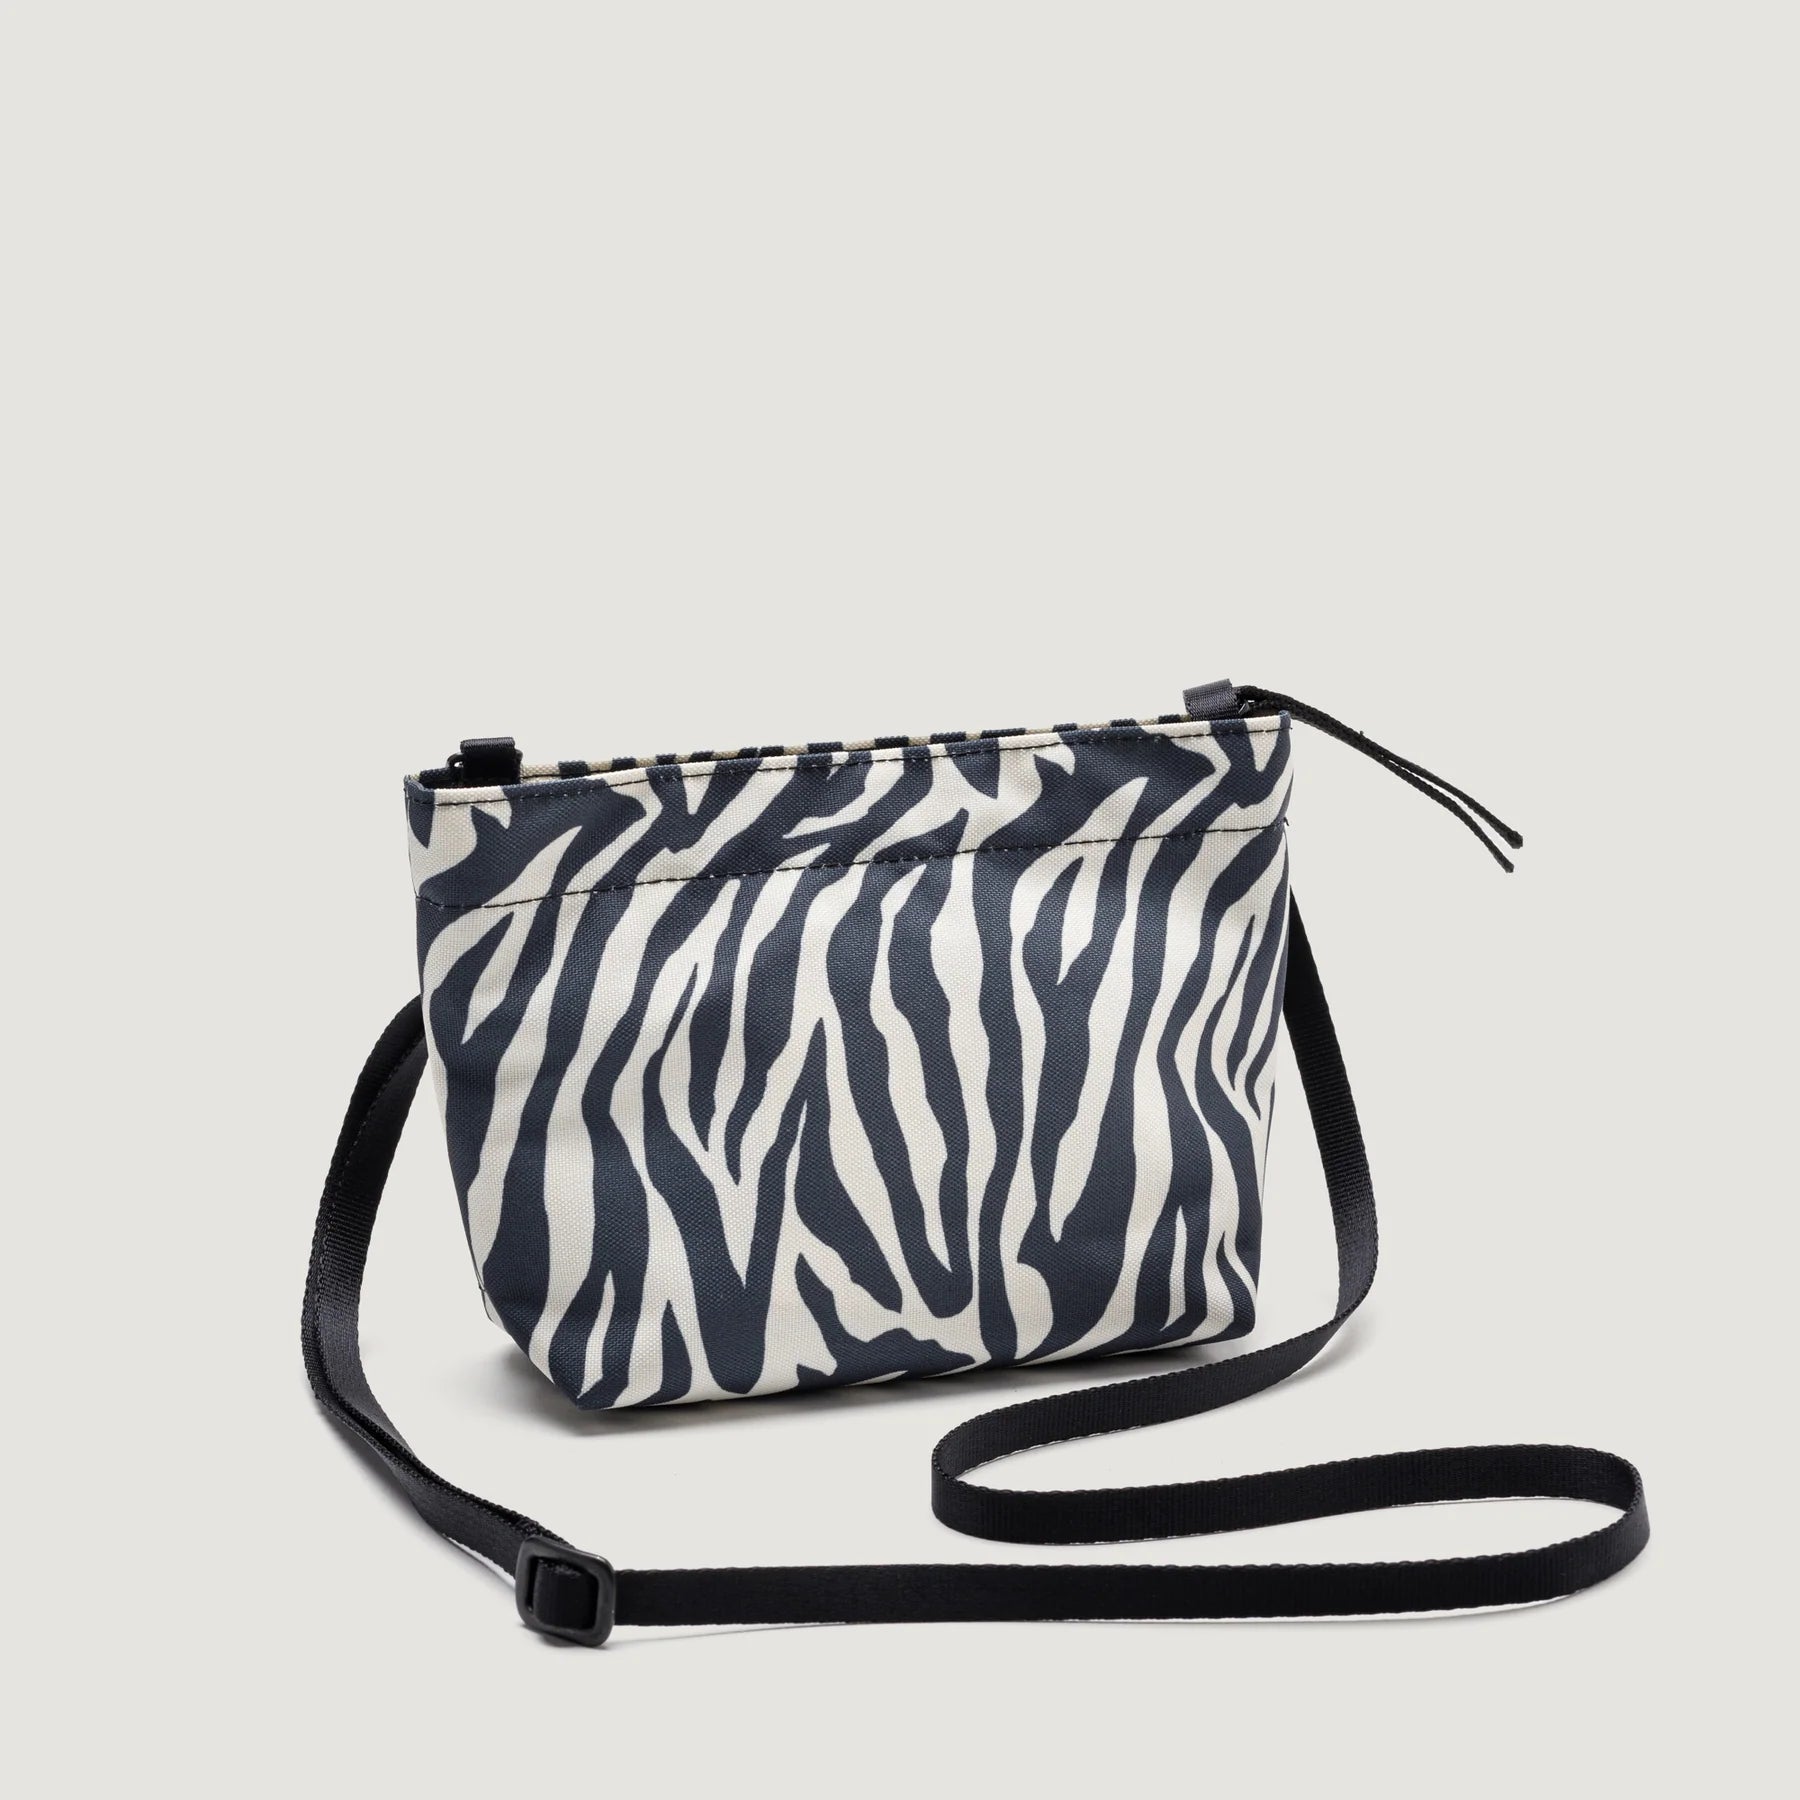 A small Zipper Pouch Mini in Zebra print with a black adjustable strap, displayed against a white background by Bags in Progress.